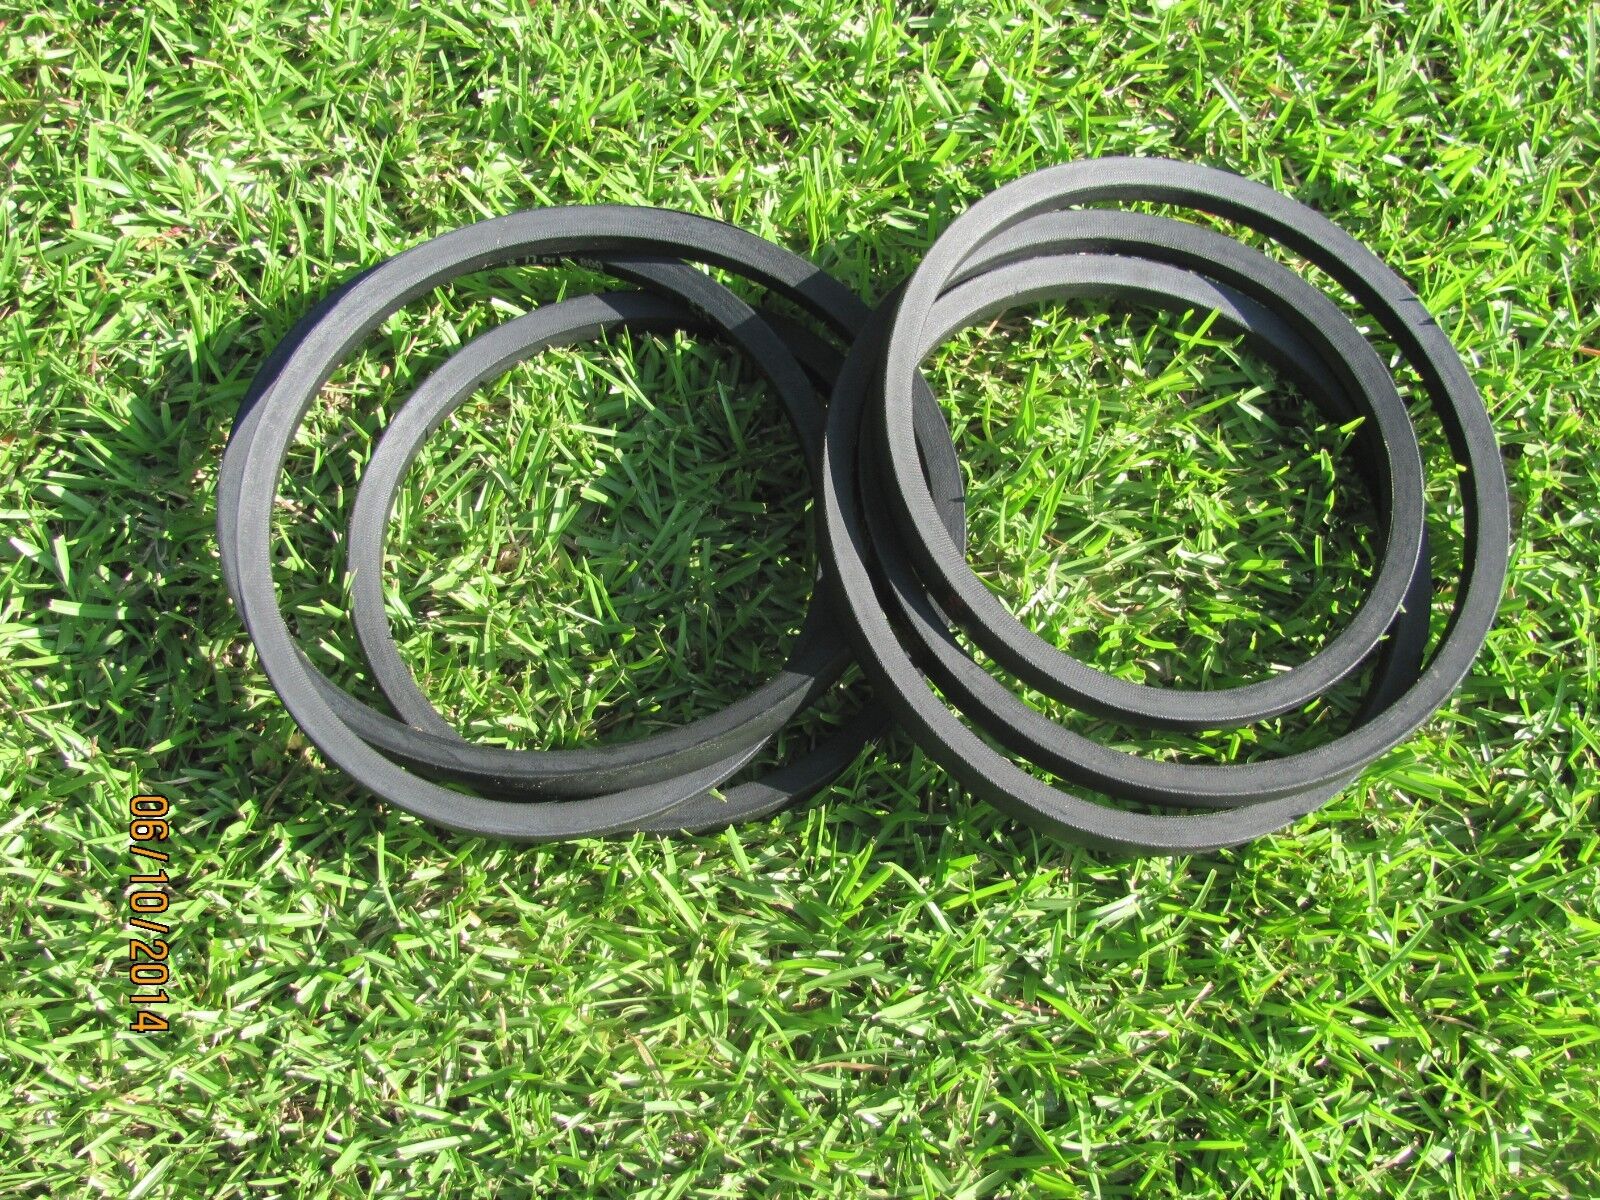 2 REPLACEMENT BELTS FOR SERVIS RHINO FM84  7' MOWERS ALAMO 00774519 774519